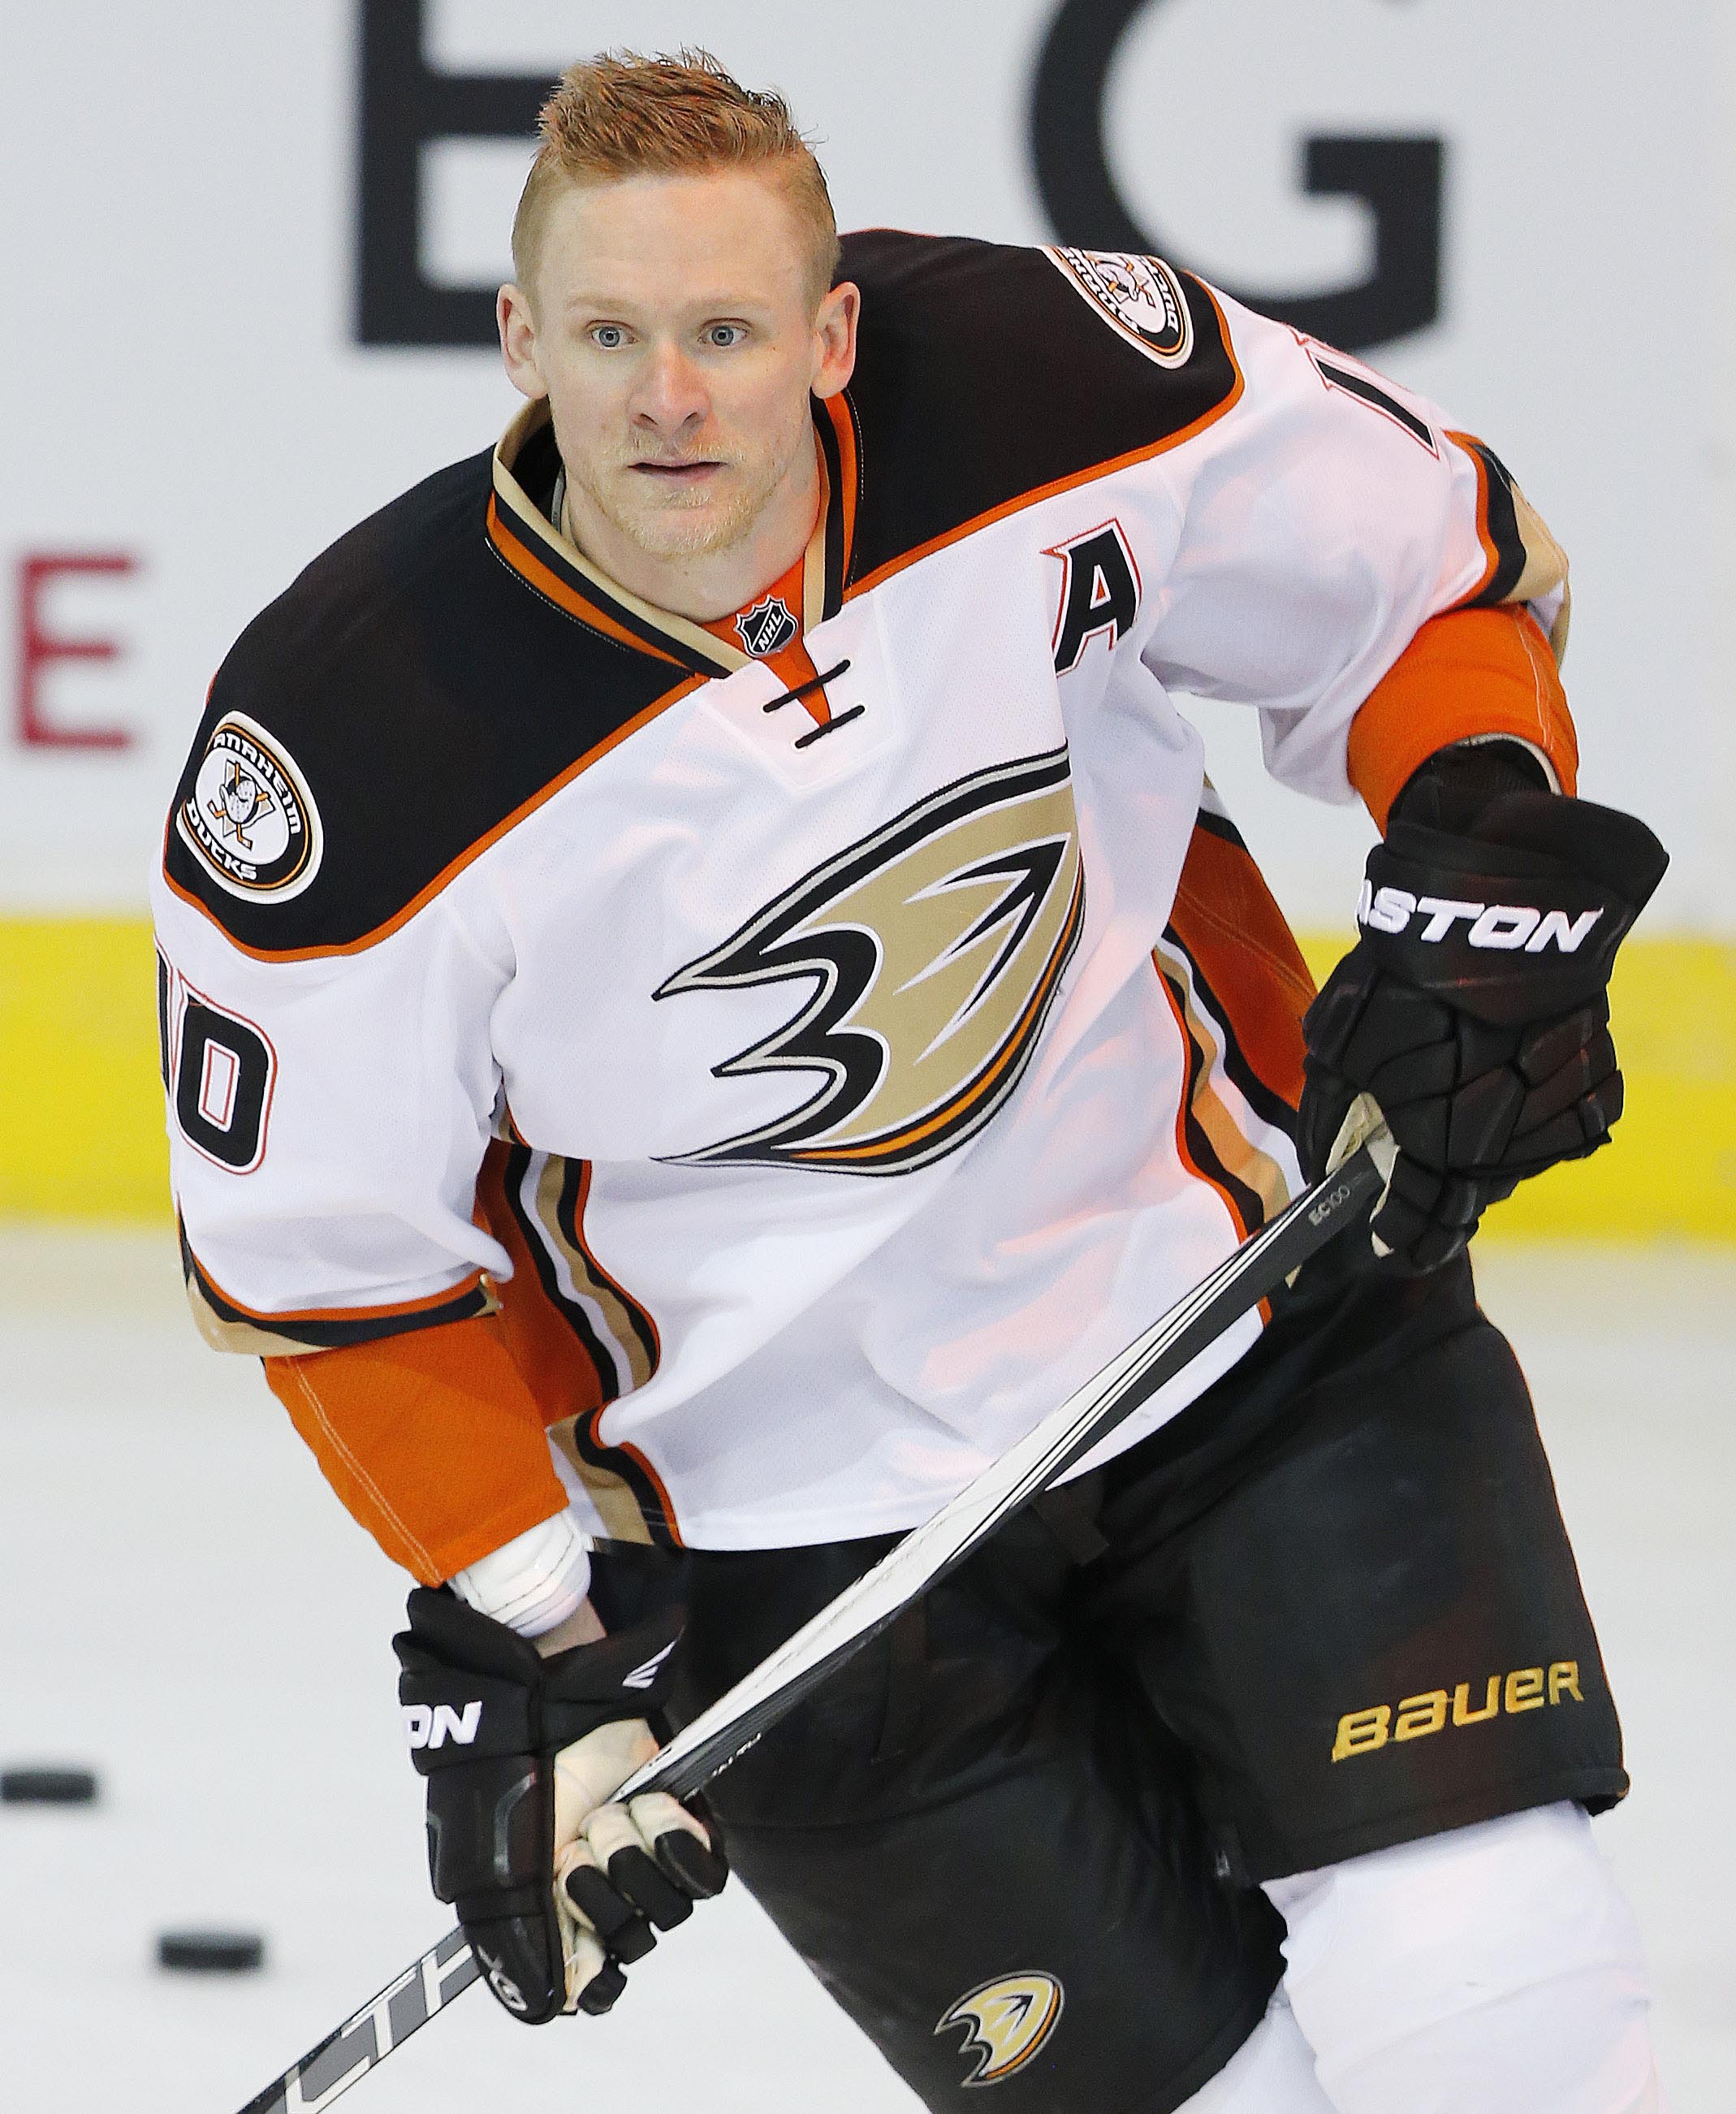 Corey Perry hopes to return to Canadiens in 2021-22